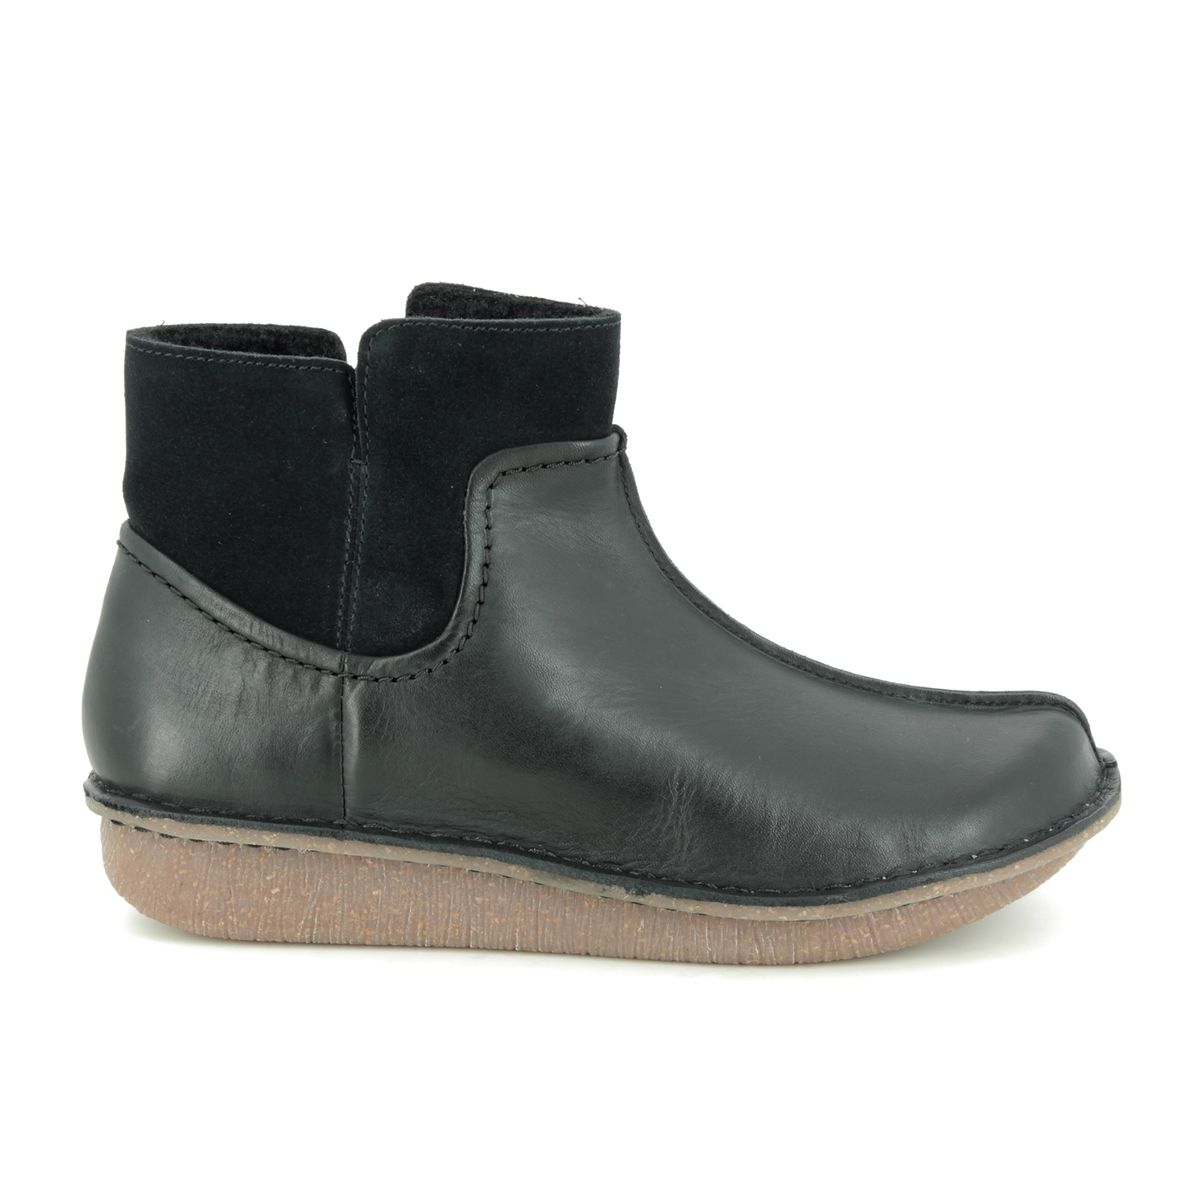 Clarks Funny Mid Black leather Womens Ankle Boots 4432-14D